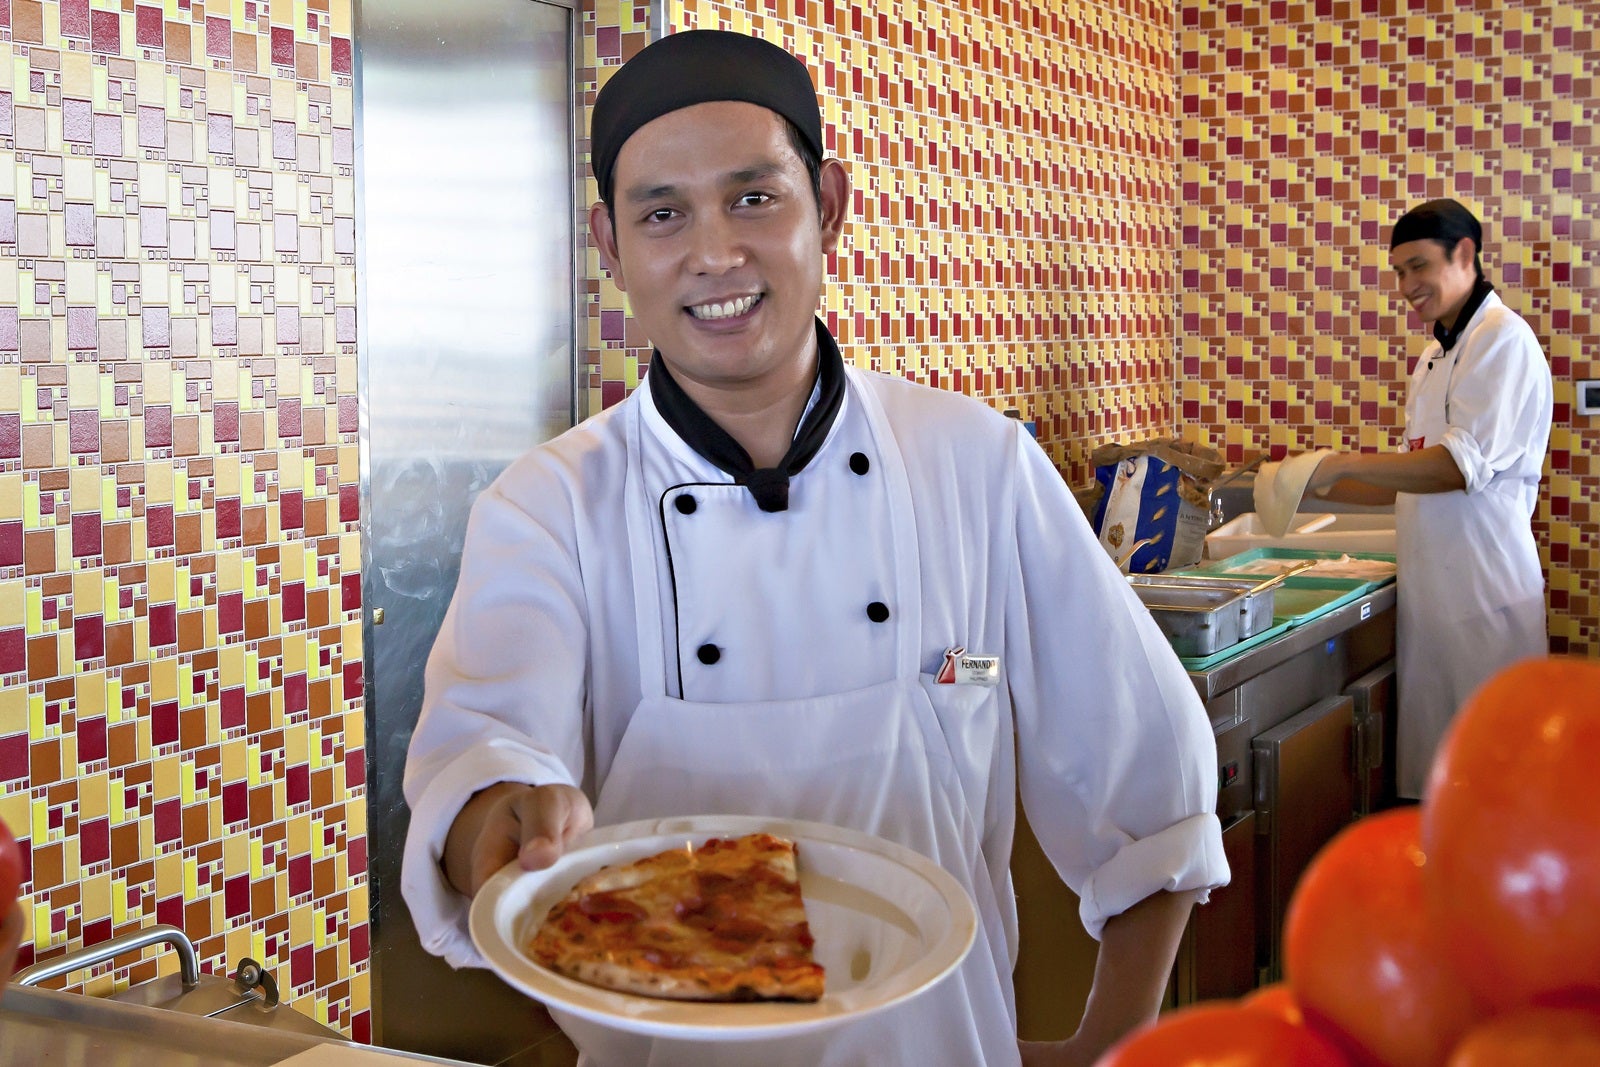 A cruise ship crew member offers a plate of pizza